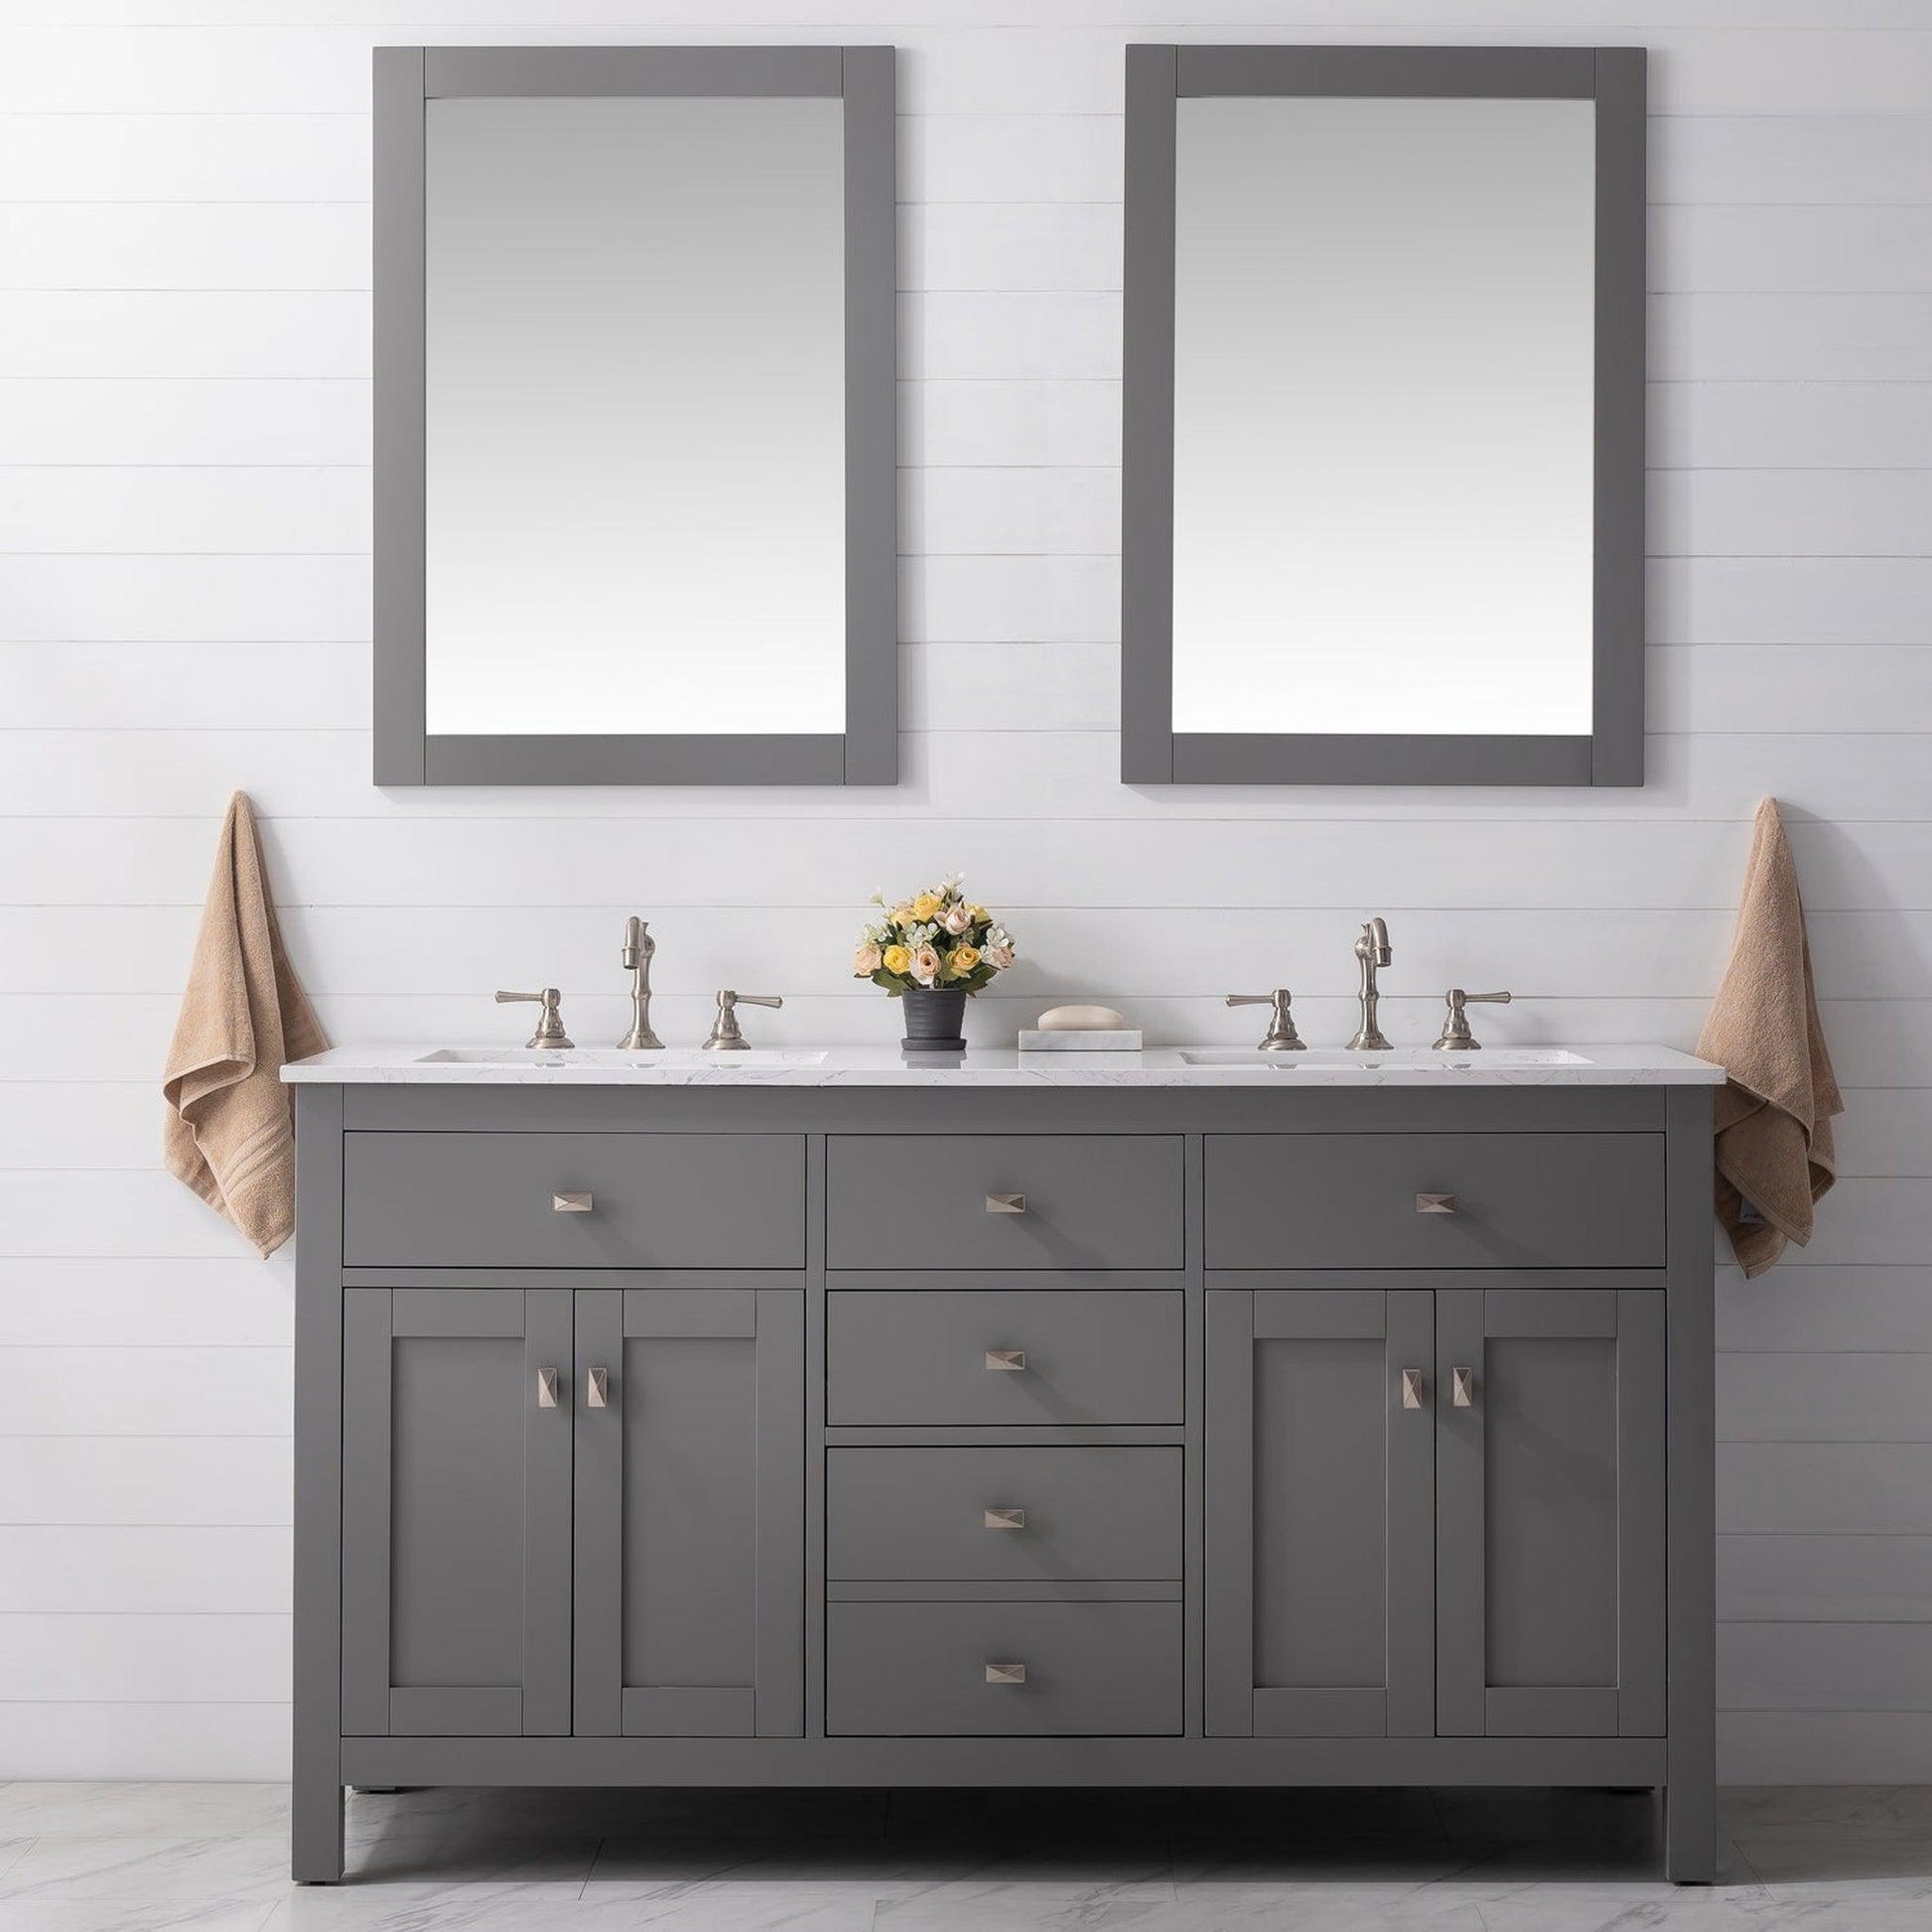 Eviva Totti Artemis 60" x 34" Gray Freestanding Bathroom Vanity With Carrara Style Man-made Stone Countertop and Double Undermount Sink